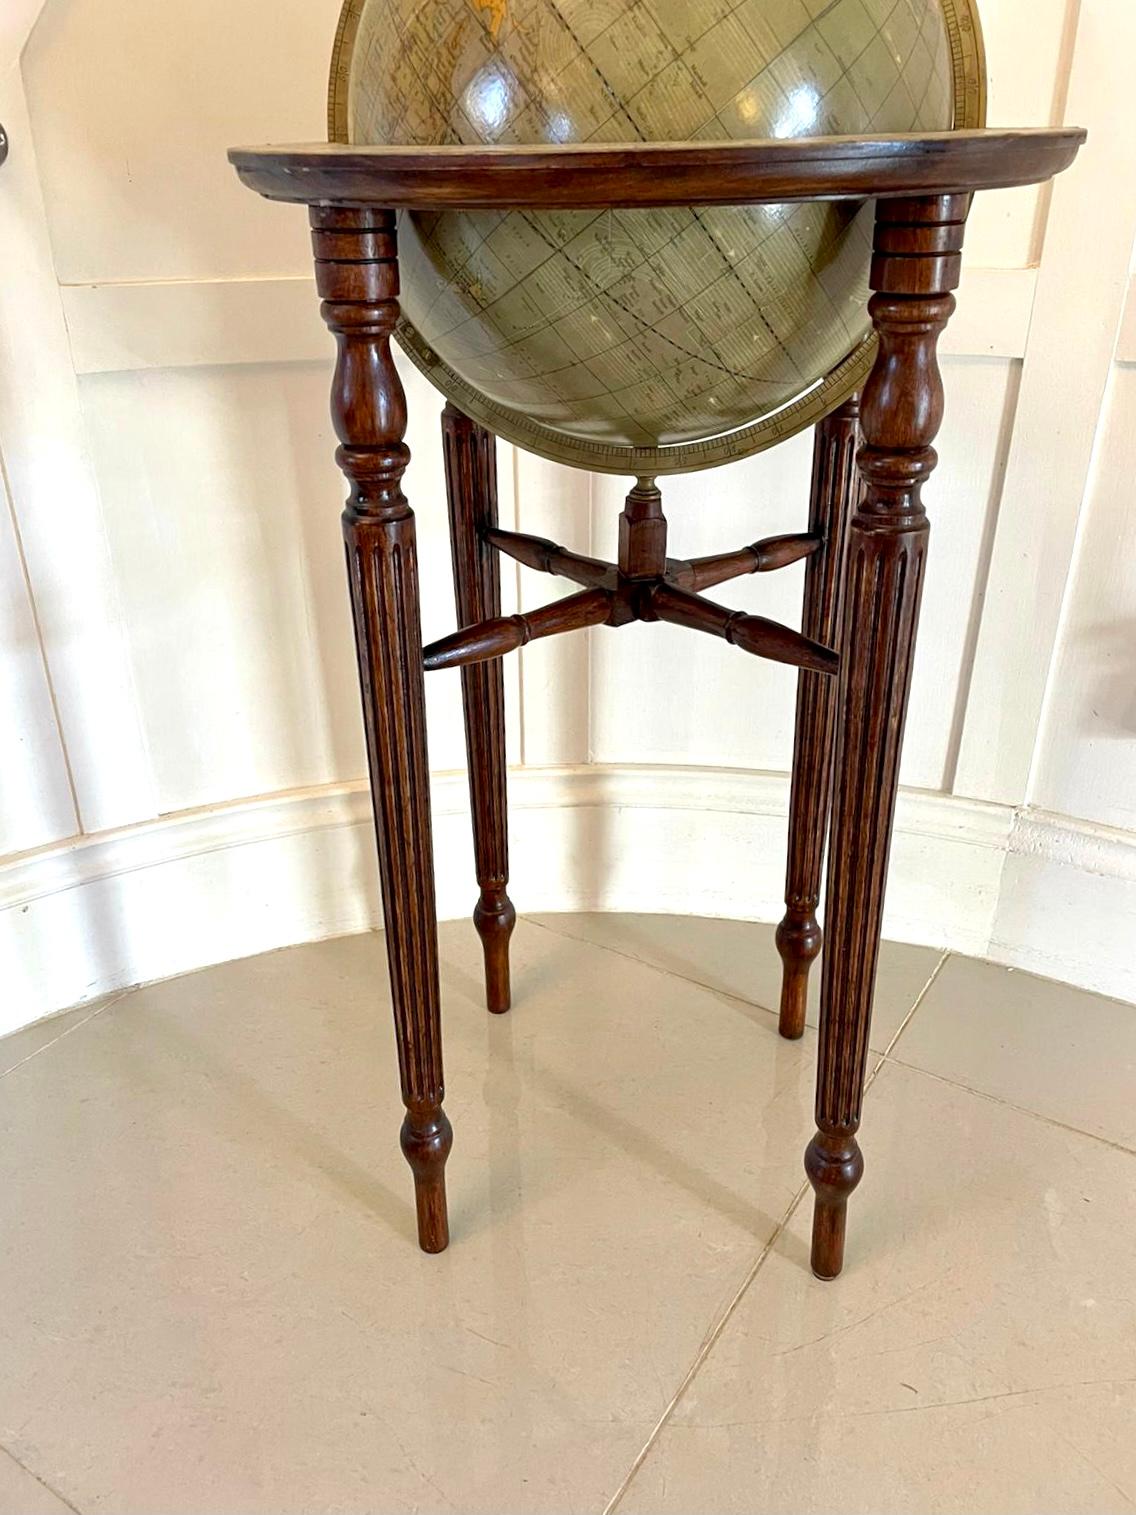 Antique Victorian quality floor standing library globe having a quality globe of the world above four quality reeded legs with turned feet united by a turned crossed stretcher.

A marvelous piece of elegant proportions in lovely original